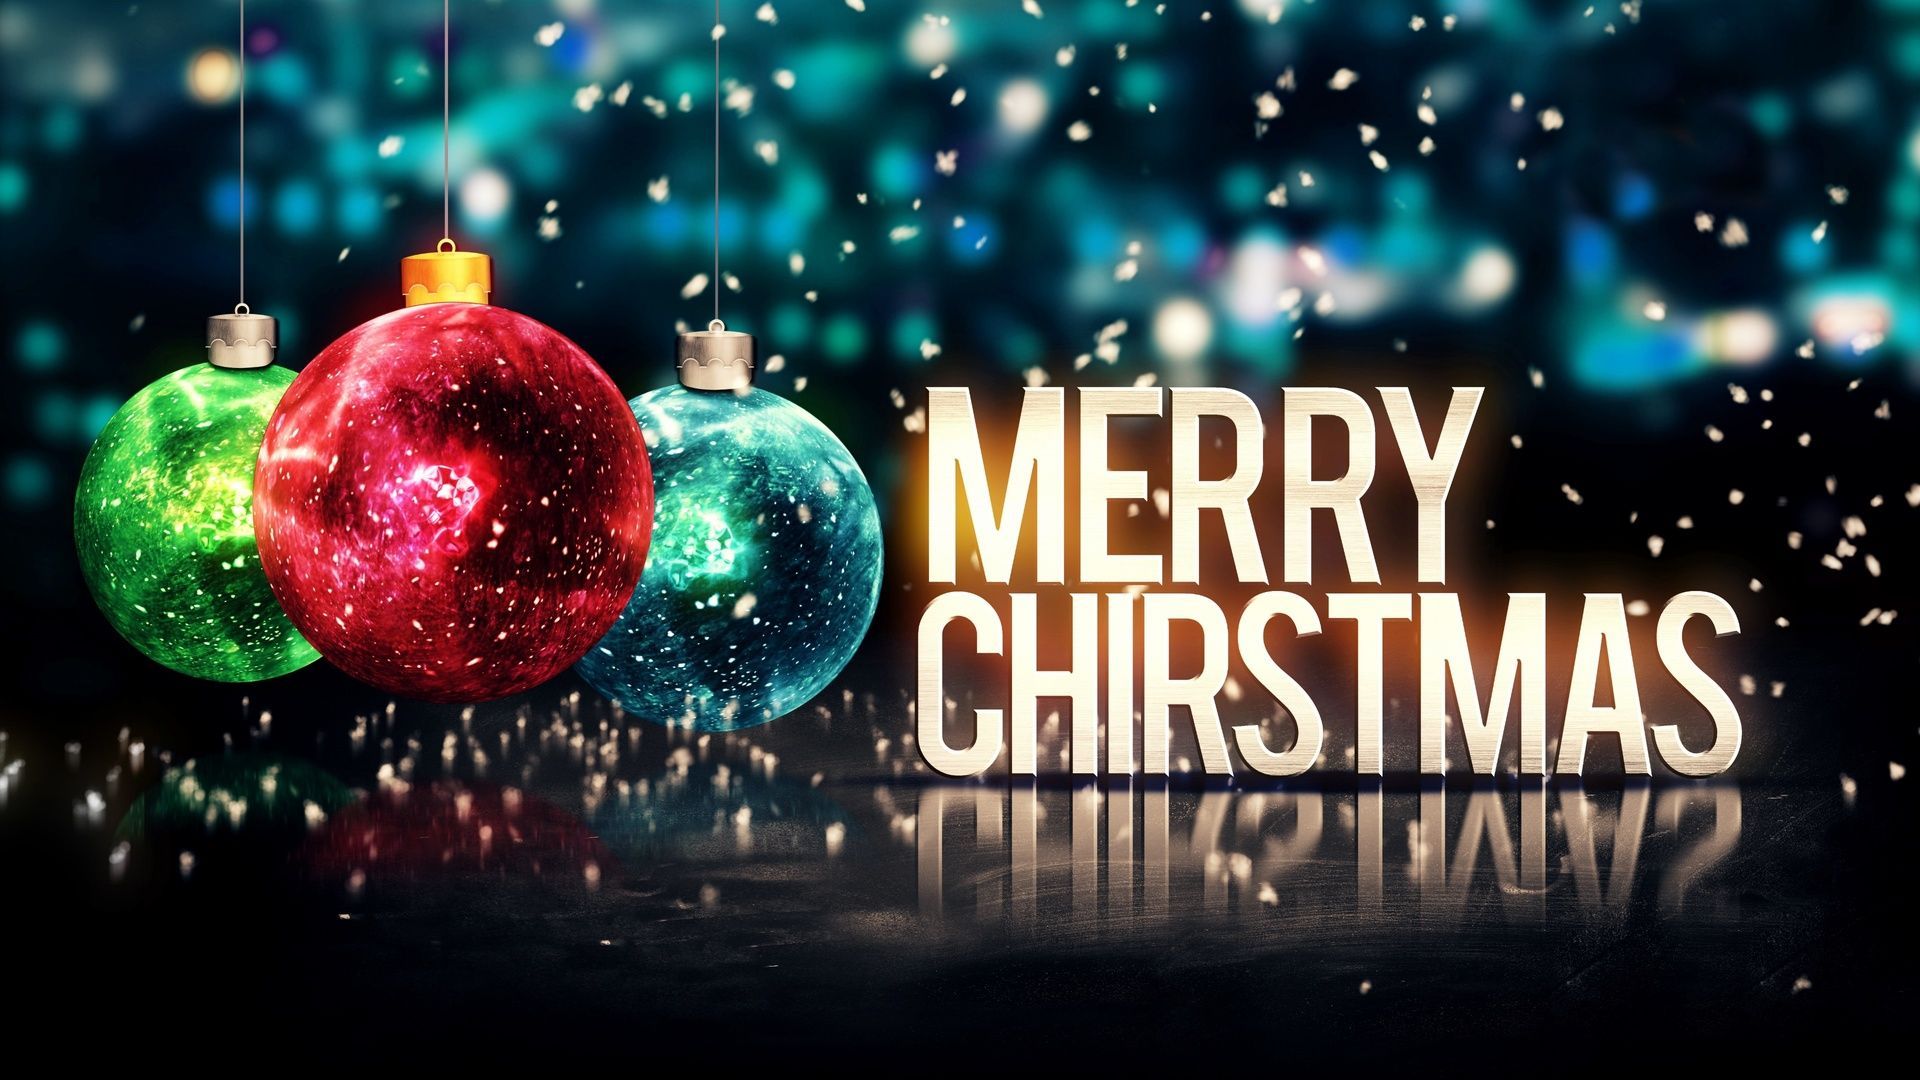 Merry Christmas Background 4k Ultra HD Wallpaper 4k Christmas HD Wallpaper 80 Image. Merry christmas wallpaper, Merry christmas wishes, Merry christmas image